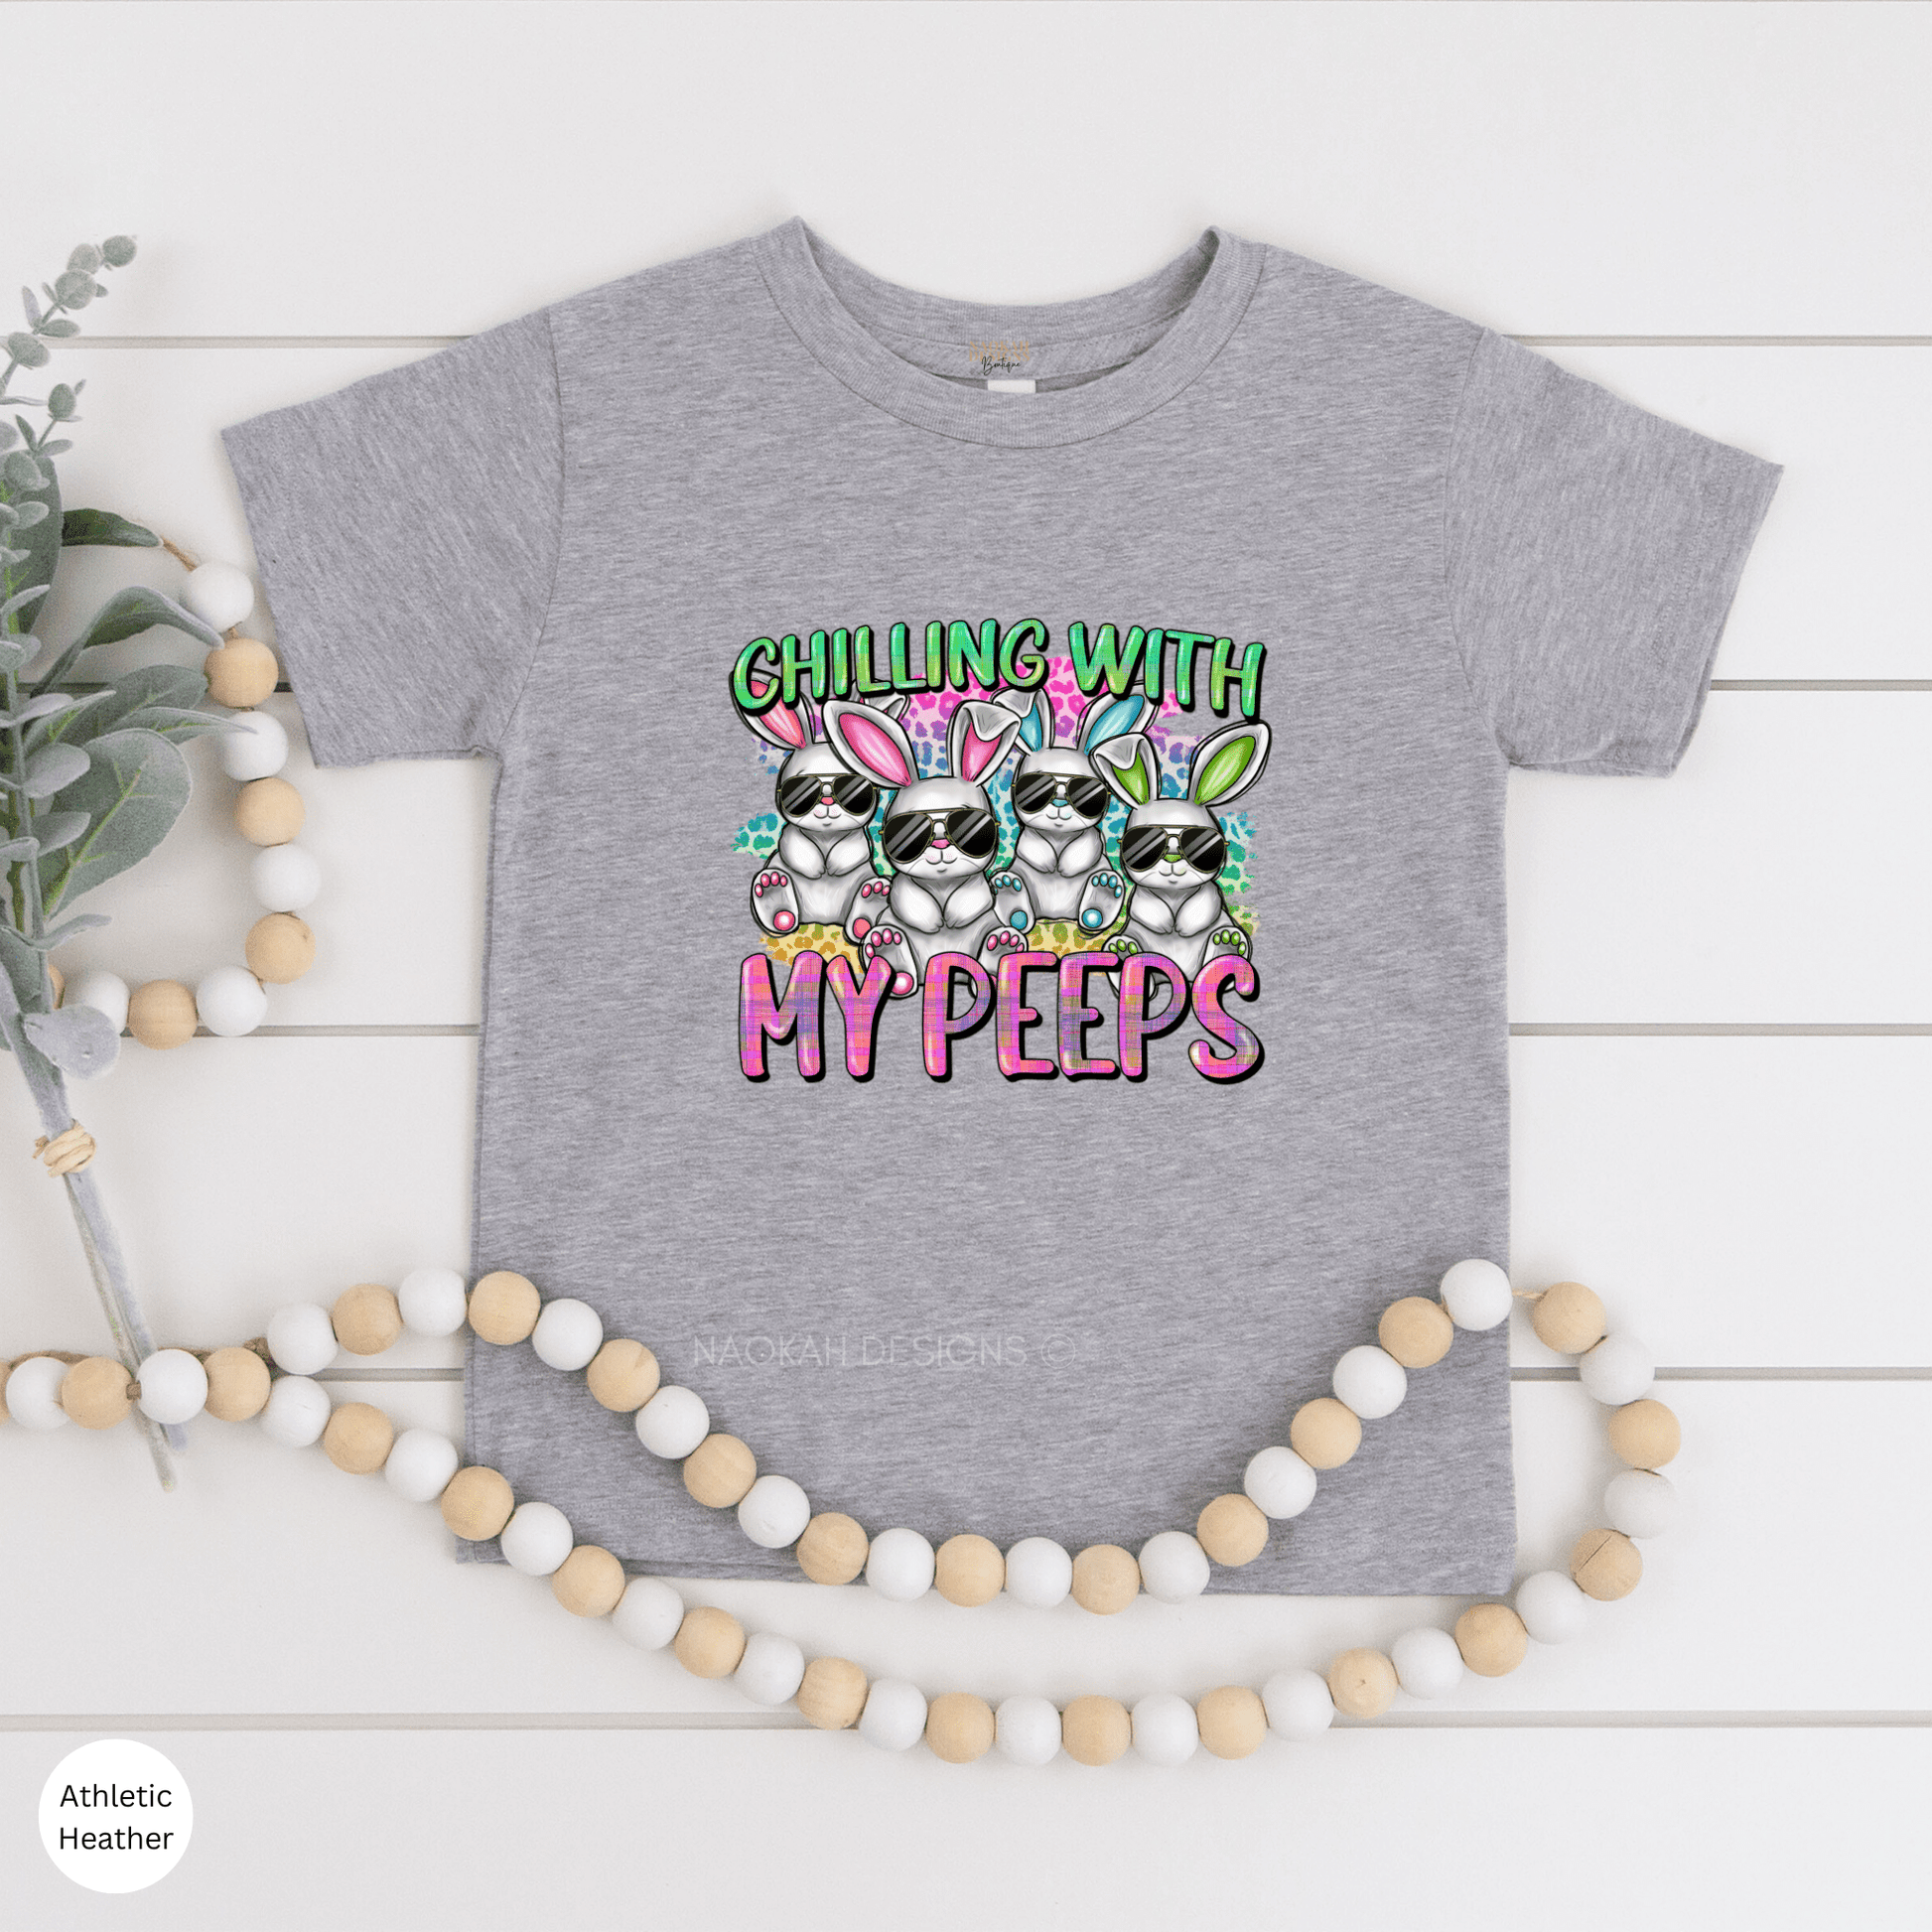 Chilling With My Peeps Shirt, Child's Easter Shirt, Kids Easter Bunny Shirt, Youth Easter Peeps Shirt, Easter Toddler Bunny Shirt